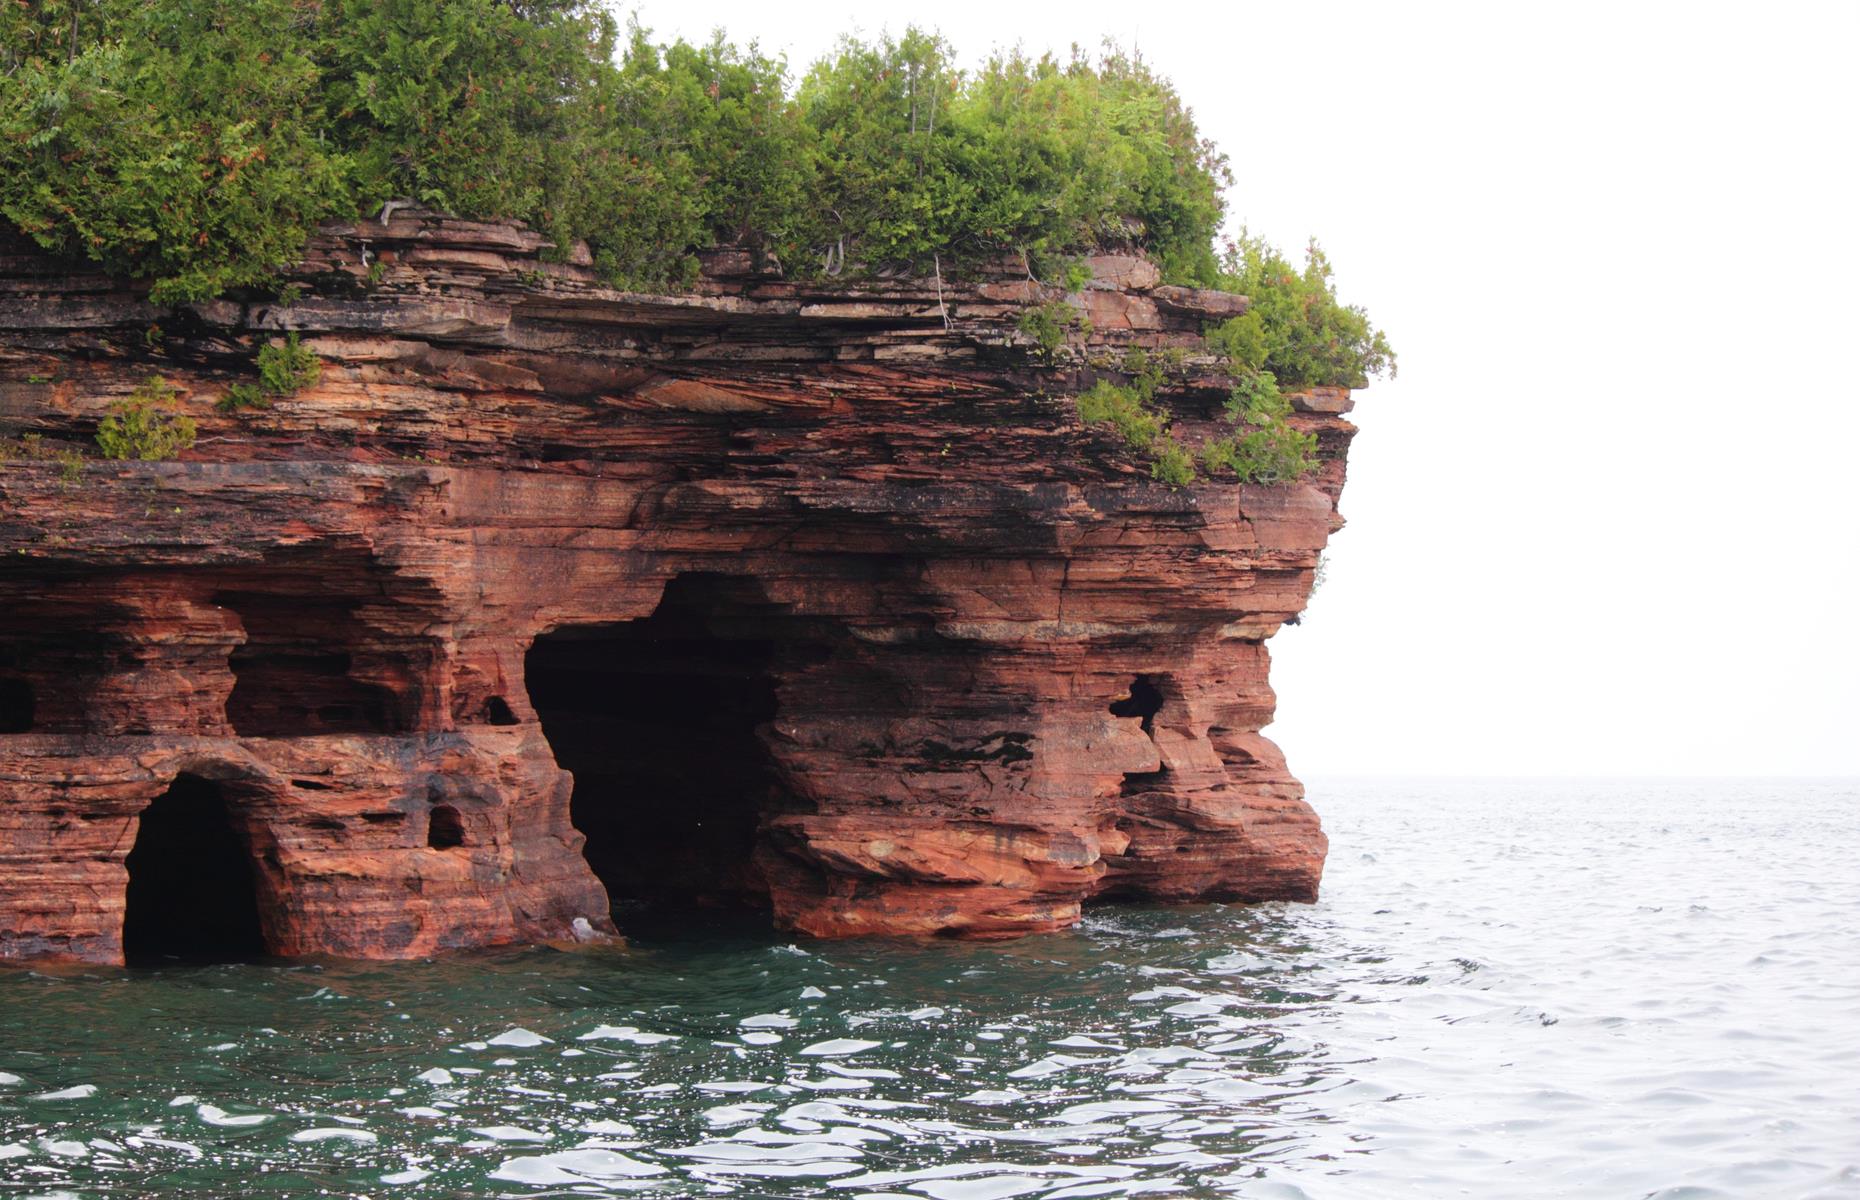 <p><a href="http://www.apostleislandsareacampground.com/">This easy-going camp</a> touts itself as the "Gateway to the Apostle Islands National Lakeshore". The lakeshore, fringing Lake Superior, is all islands, coves and tree-covered clifftops, and cruises exploring the area (<a href="https://www.apostleisland.com/area-highlights-faqs/#faqs">currently operating at reduced capacity</a>) typically leave from nearby Bayfield. Onsite, there are wooded or open lots – some of which have breathtaking island views – and full hook-ups available. </p>